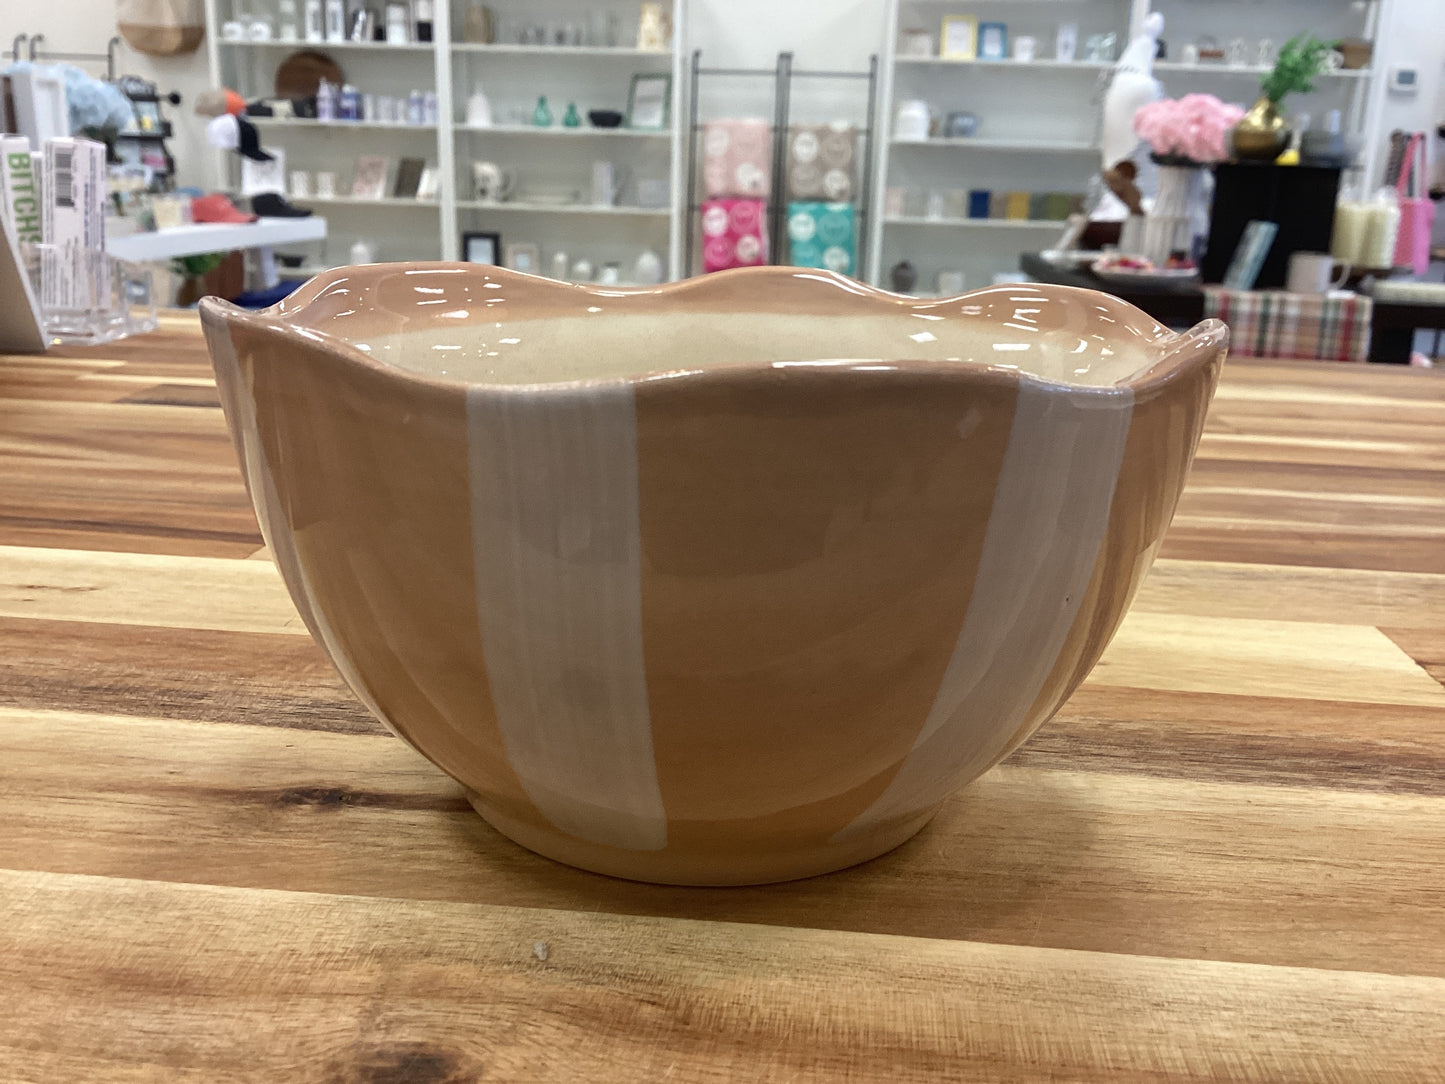 Bowl with scalloped edge…white and tan or pink stripes